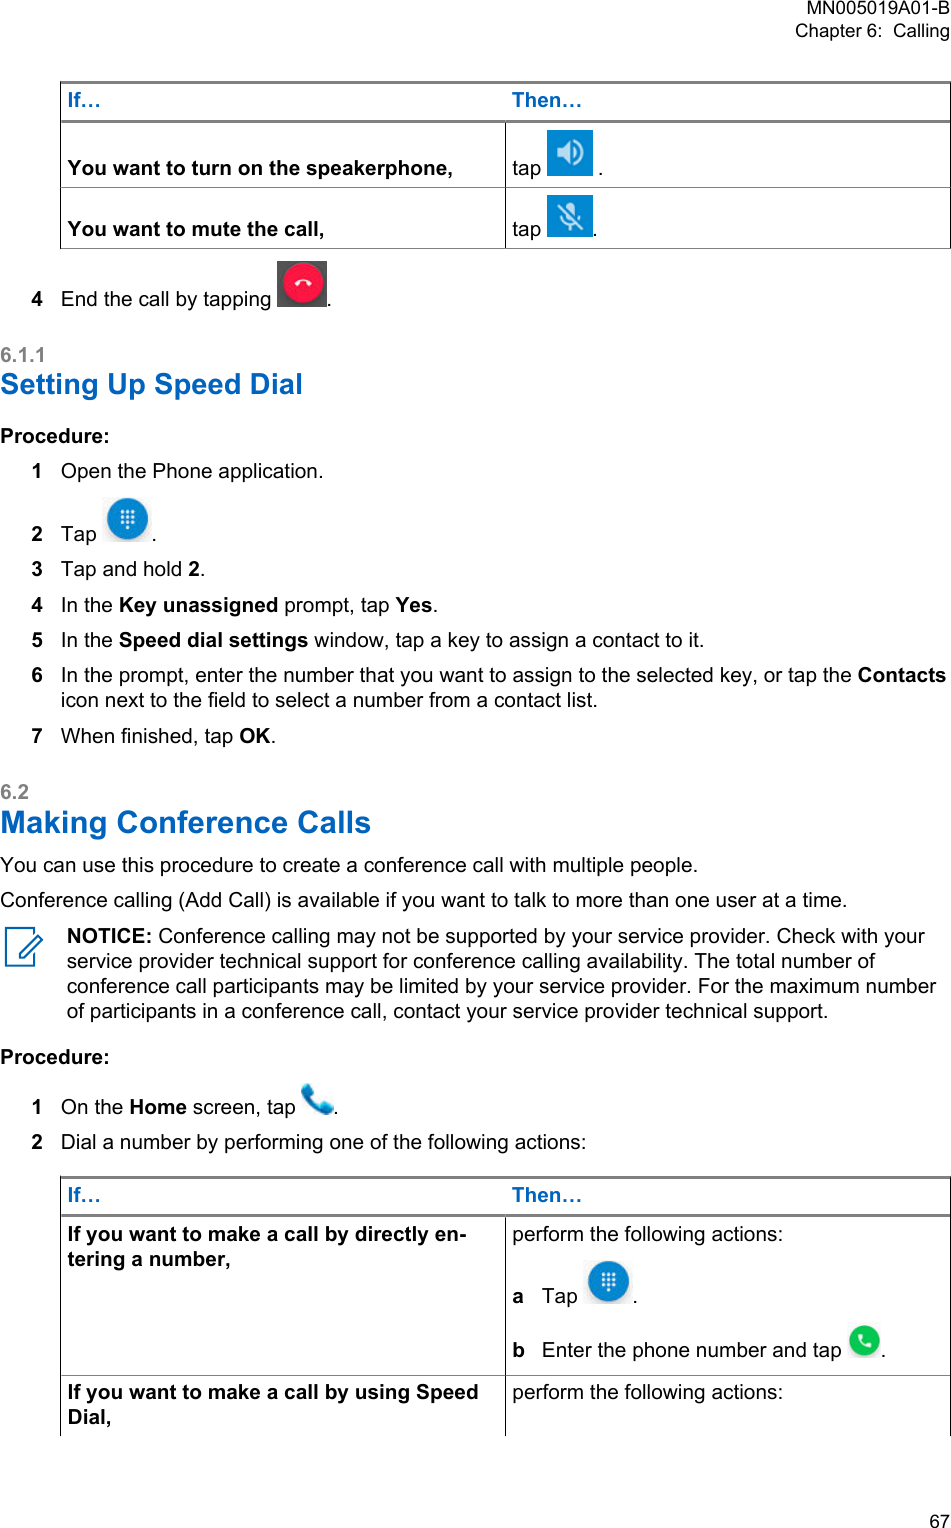 If… Then…You want to turn on the speakerphone, tap   .You want to mute the call, tap  .4End the call by tapping  .6.1.1Setting Up Speed DialProcedure:1Open the Phone application.2Tap  .3Tap and hold 2.4In the Key unassigned prompt, tap Yes.5In the Speed dial settings window, tap a key to assign a contact to it.6In the prompt, enter the number that you want to assign to the selected key, or tap the Contactsicon next to the field to select a number from a contact list.7When finished, tap OK.6.2Making Conference CallsYou can use this procedure to create a conference call with multiple people.Conference calling (Add Call) is available if you want to talk to more than one user at a time.NOTICE: Conference calling may not be supported by your service provider. Check with yourservice provider technical support for conference calling availability. The total number ofconference call participants may be limited by your service provider. For the maximum numberof participants in a conference call, contact your service provider technical support.Procedure:1On the Home screen, tap  .2Dial a number by performing one of the following actions:If… Then…If you want to make a call by directly en-tering a number,perform the following actions:aTap  .bEnter the phone number and tap  .If you want to make a call by using SpeedDial,perform the following actions:MN005019A01-BChapter 6:  Calling  67